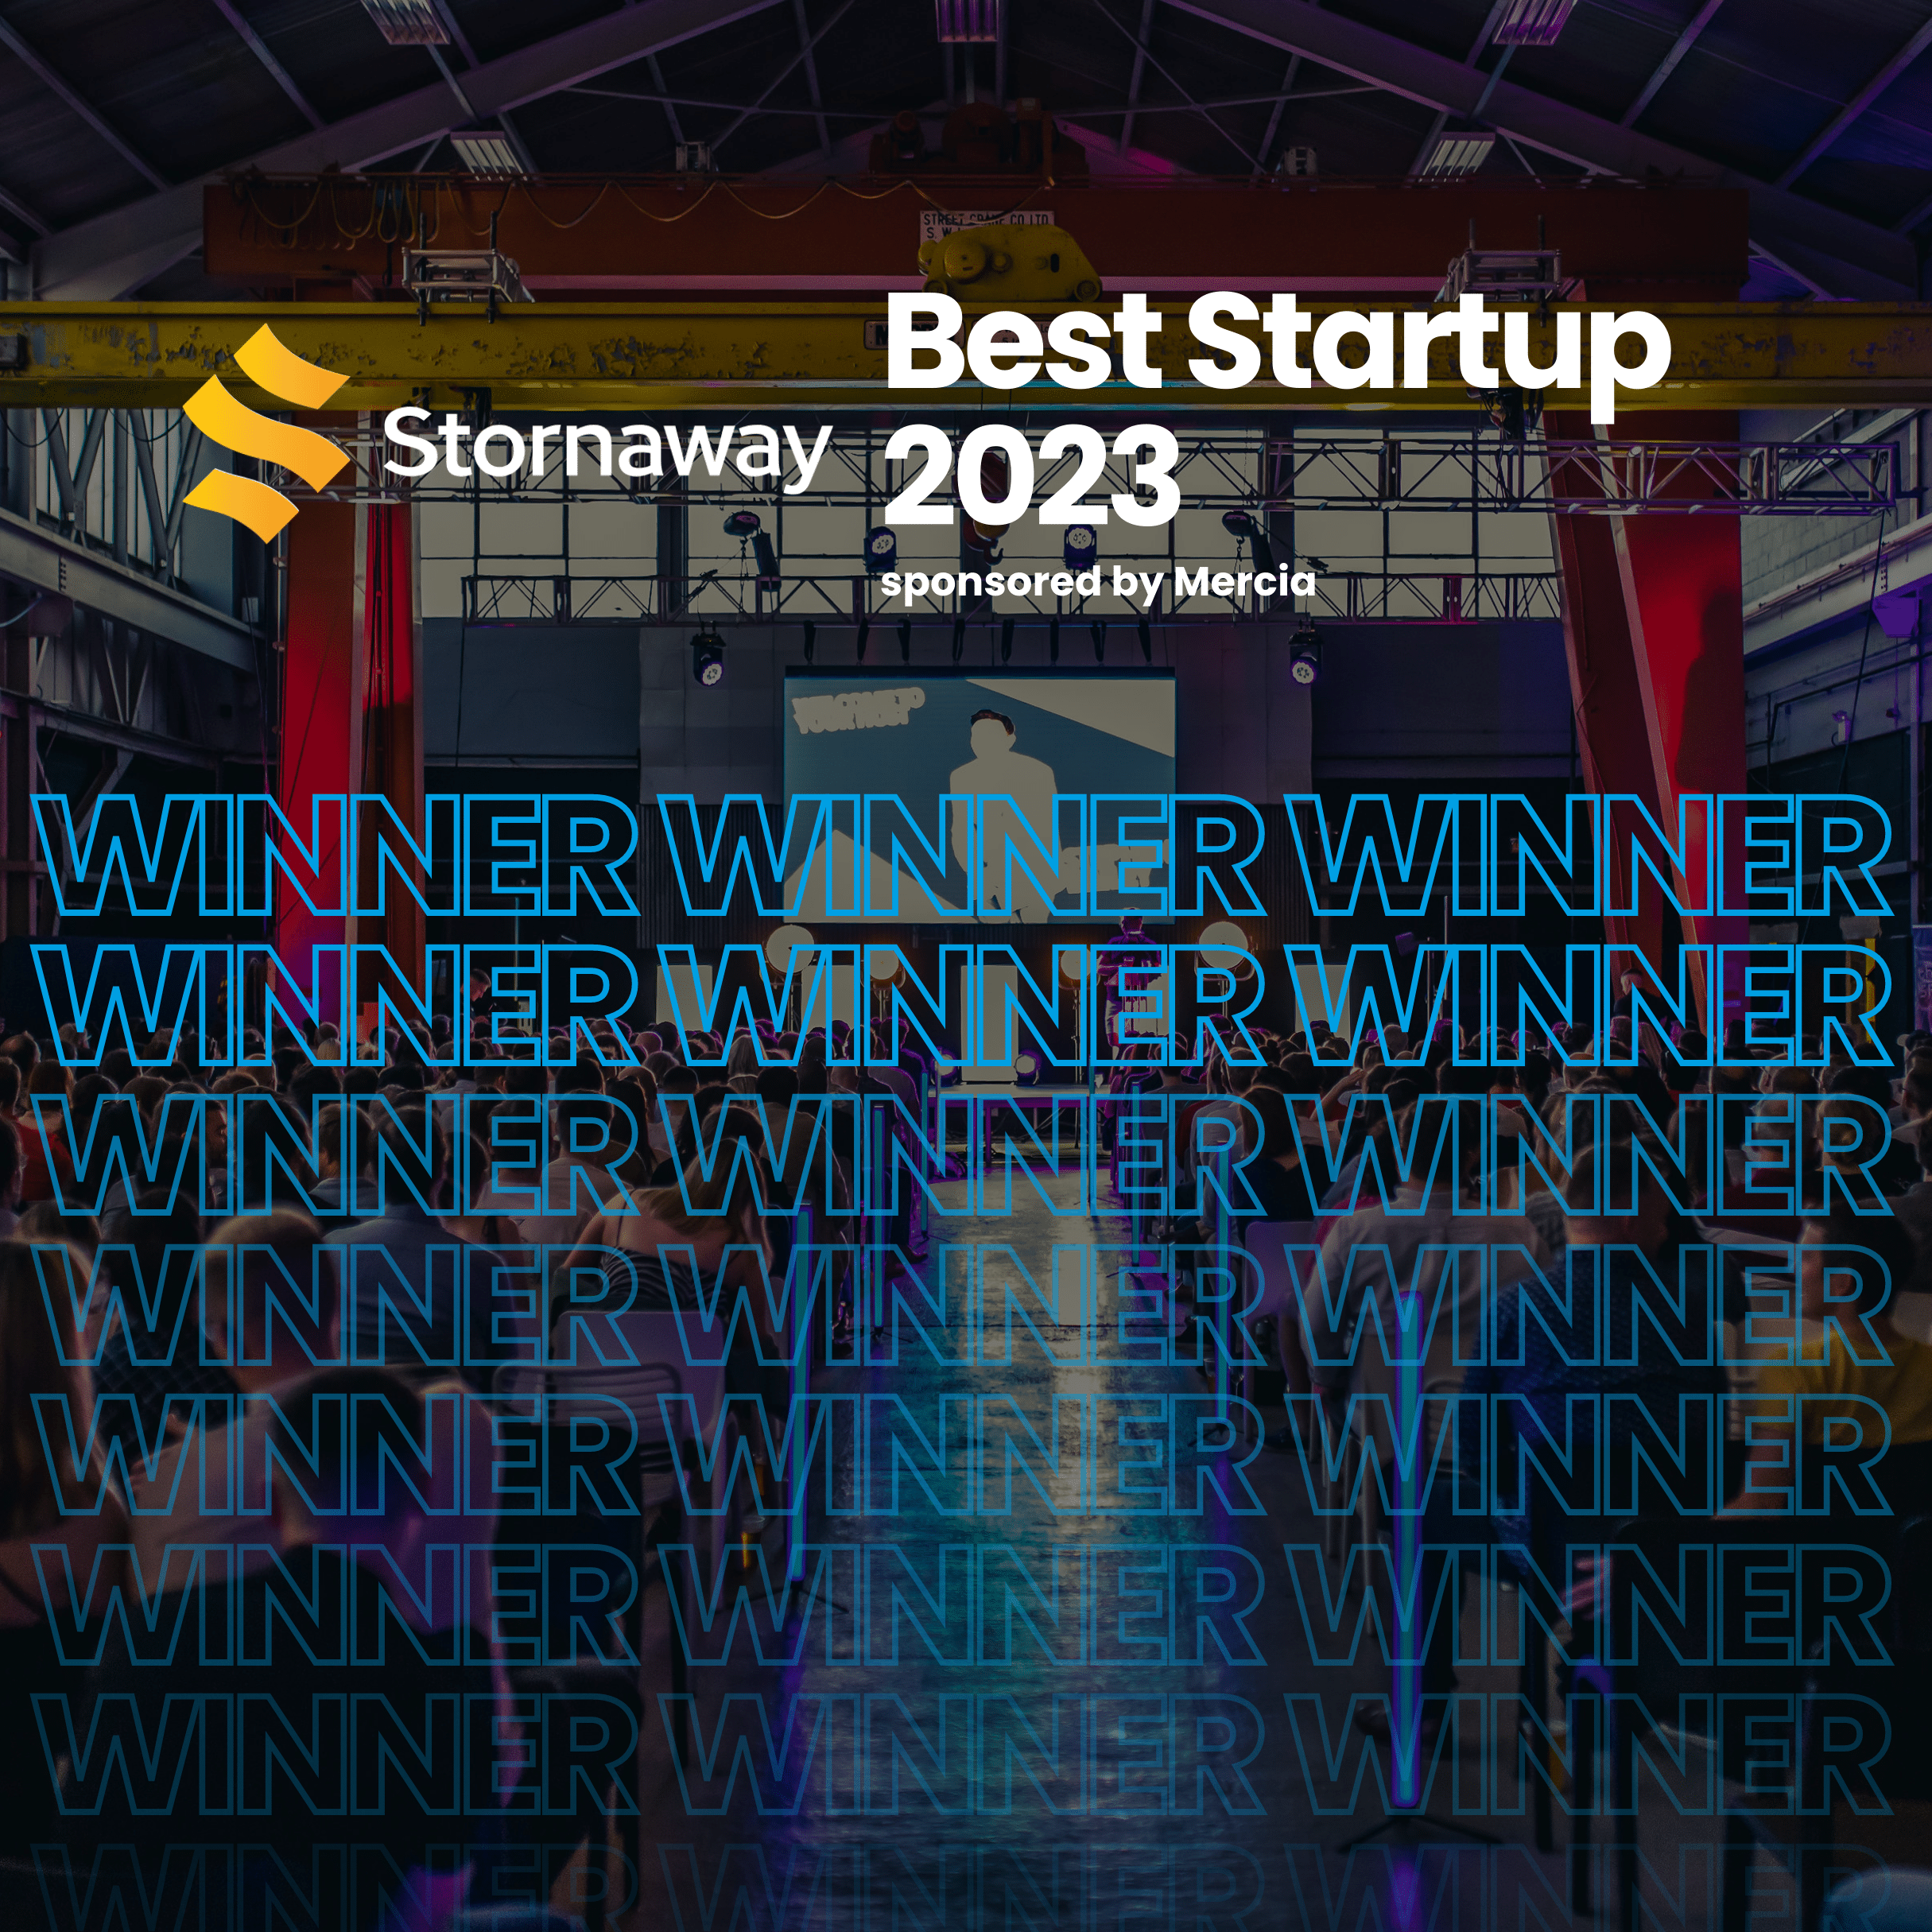 Stornaway.io named as Best Startup at the Sparkies 2023